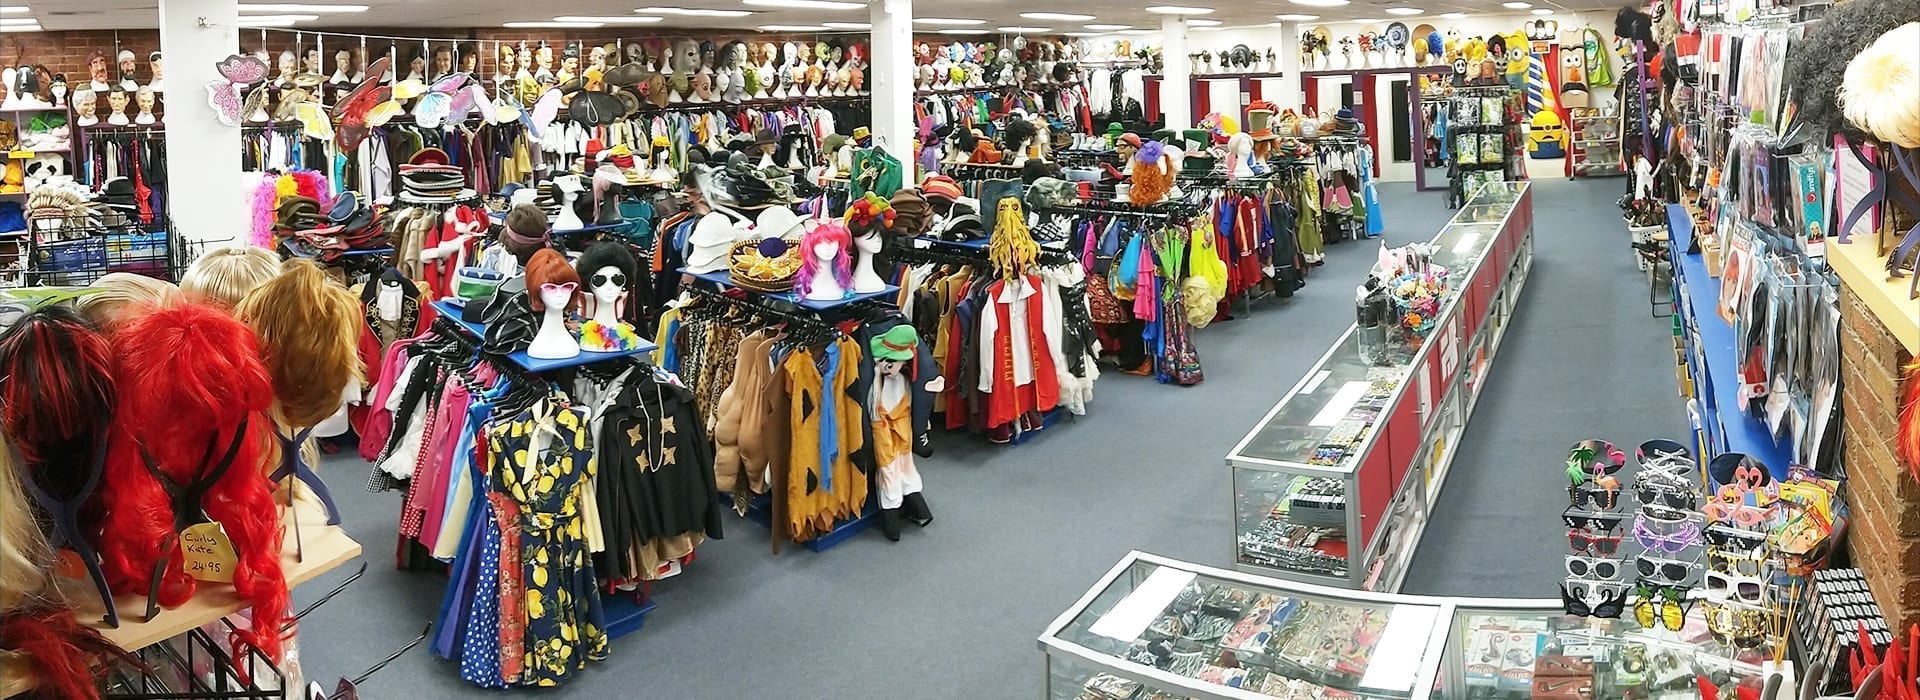 Costume Shop Near Me / Monk Vintage Thrift Shop / All orders are custom